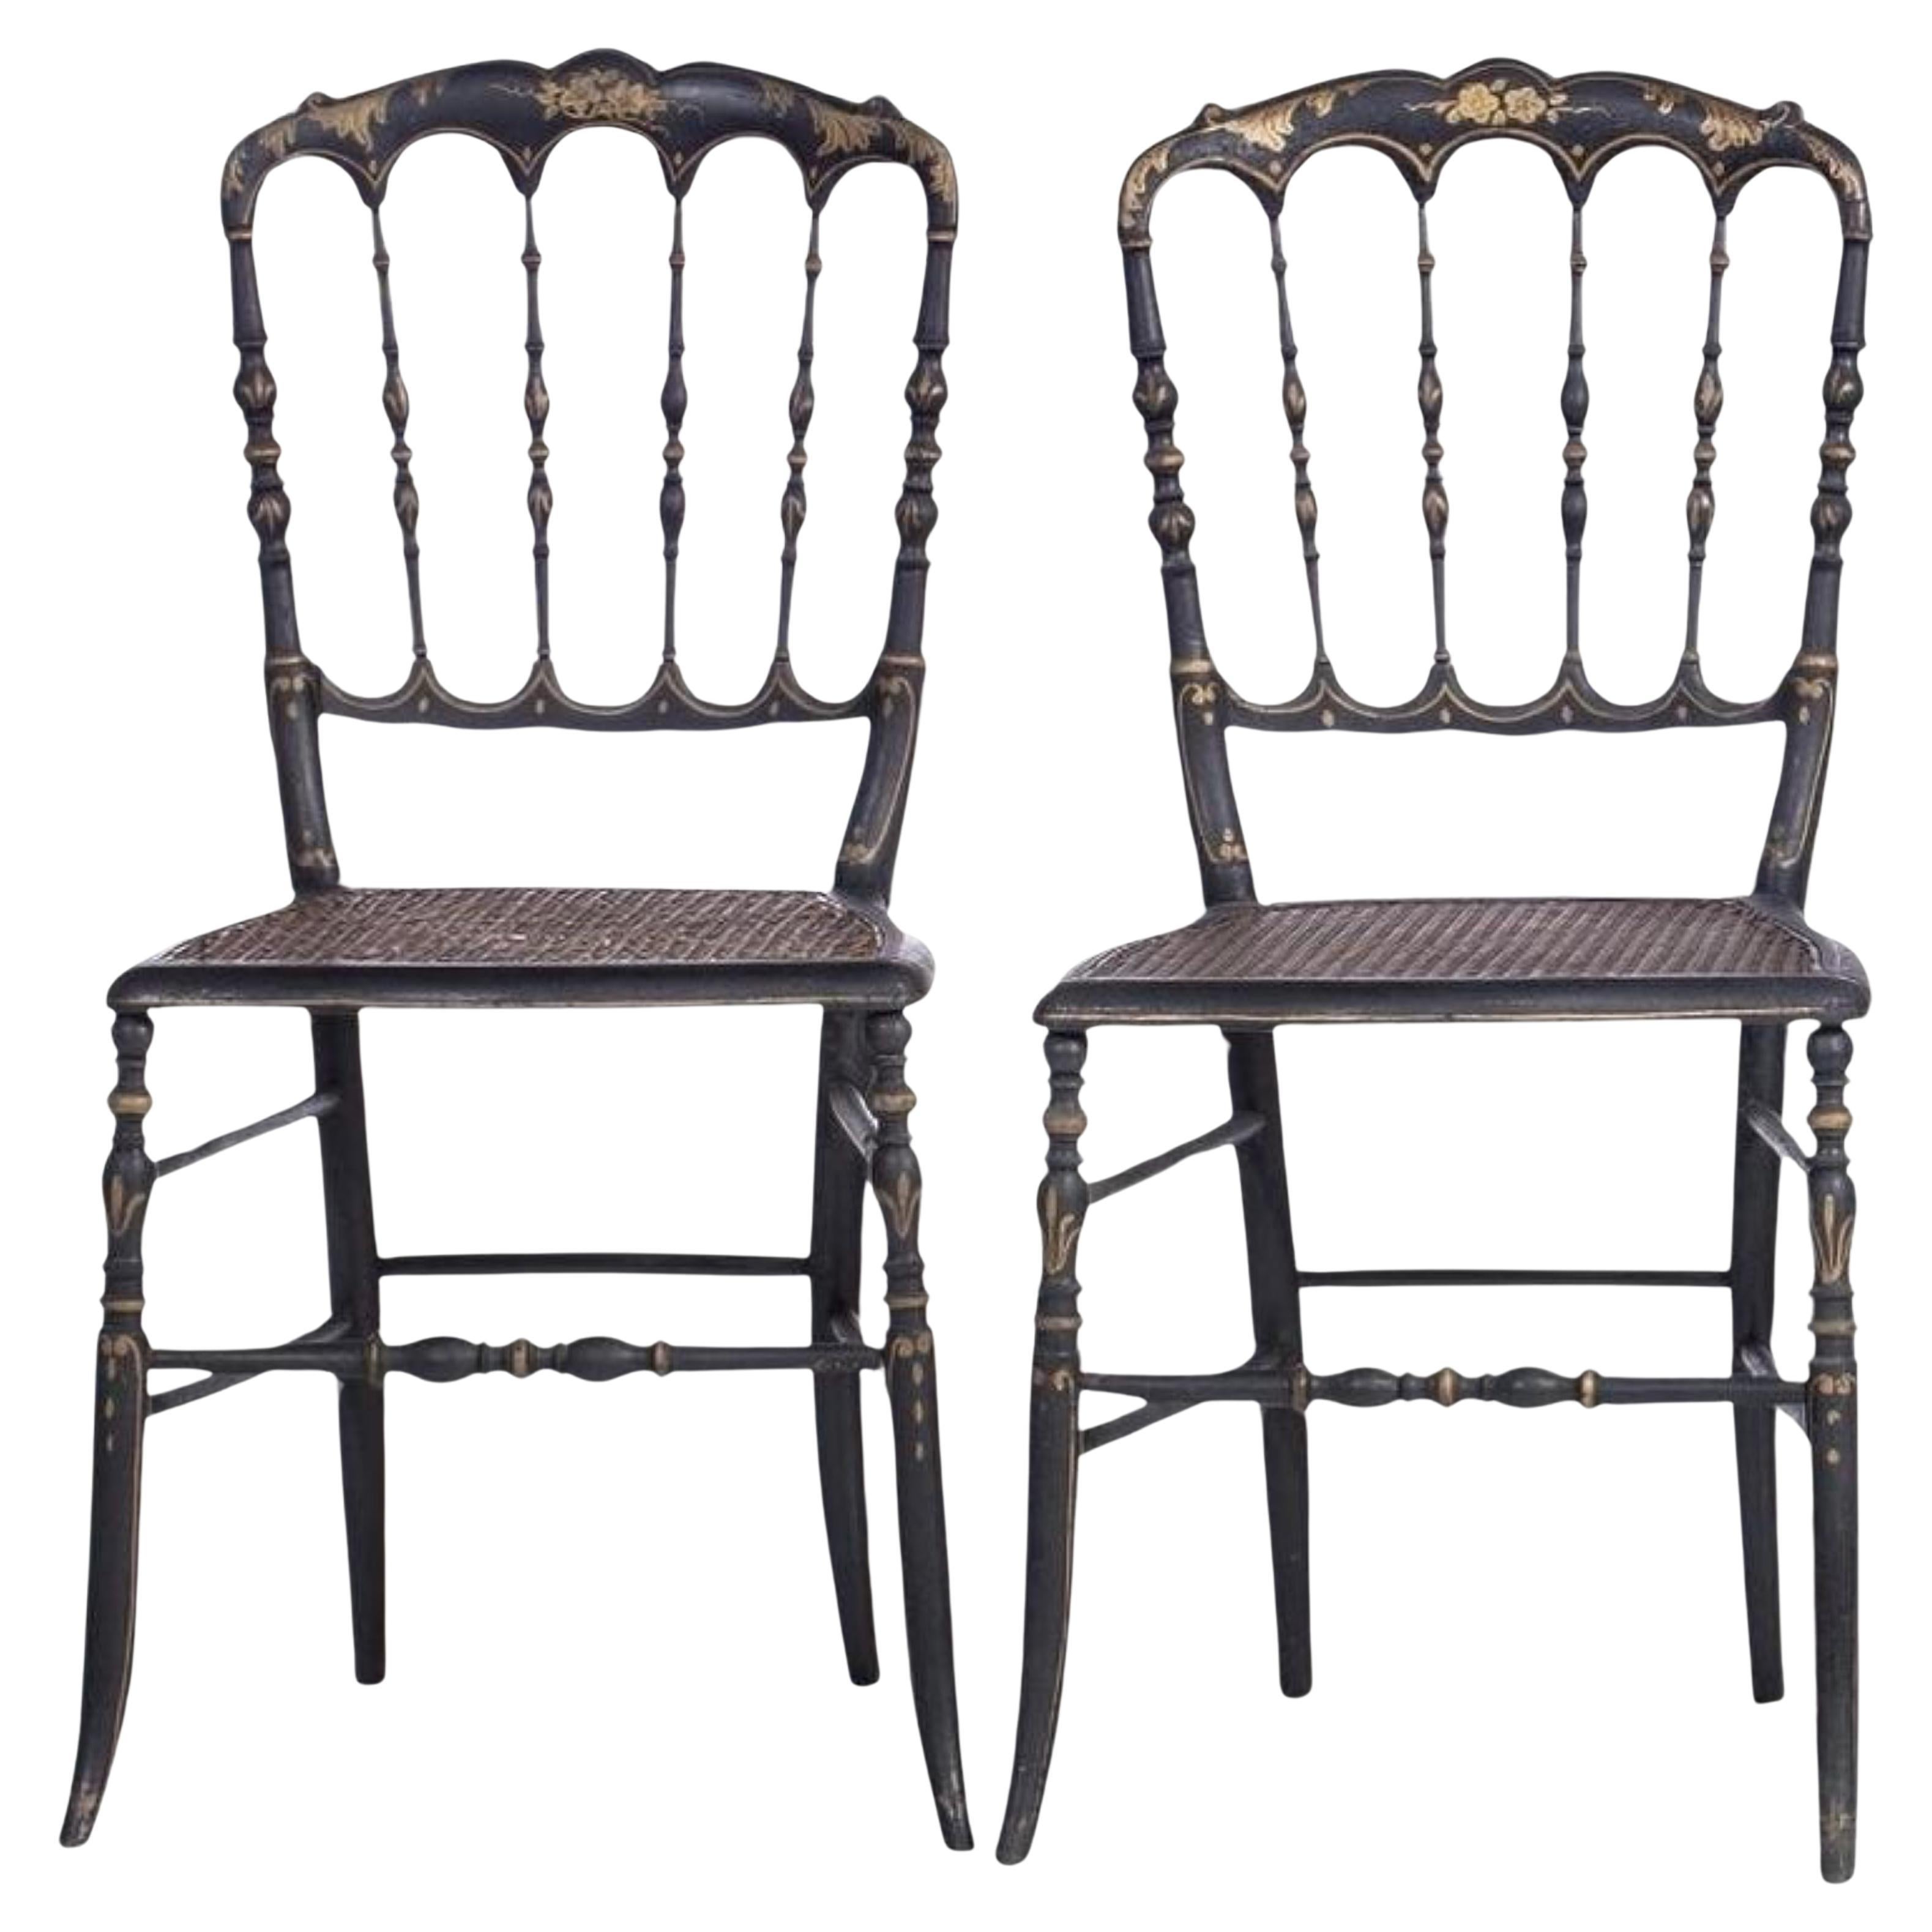 Set of Two Portuguese Chairs 19th Century